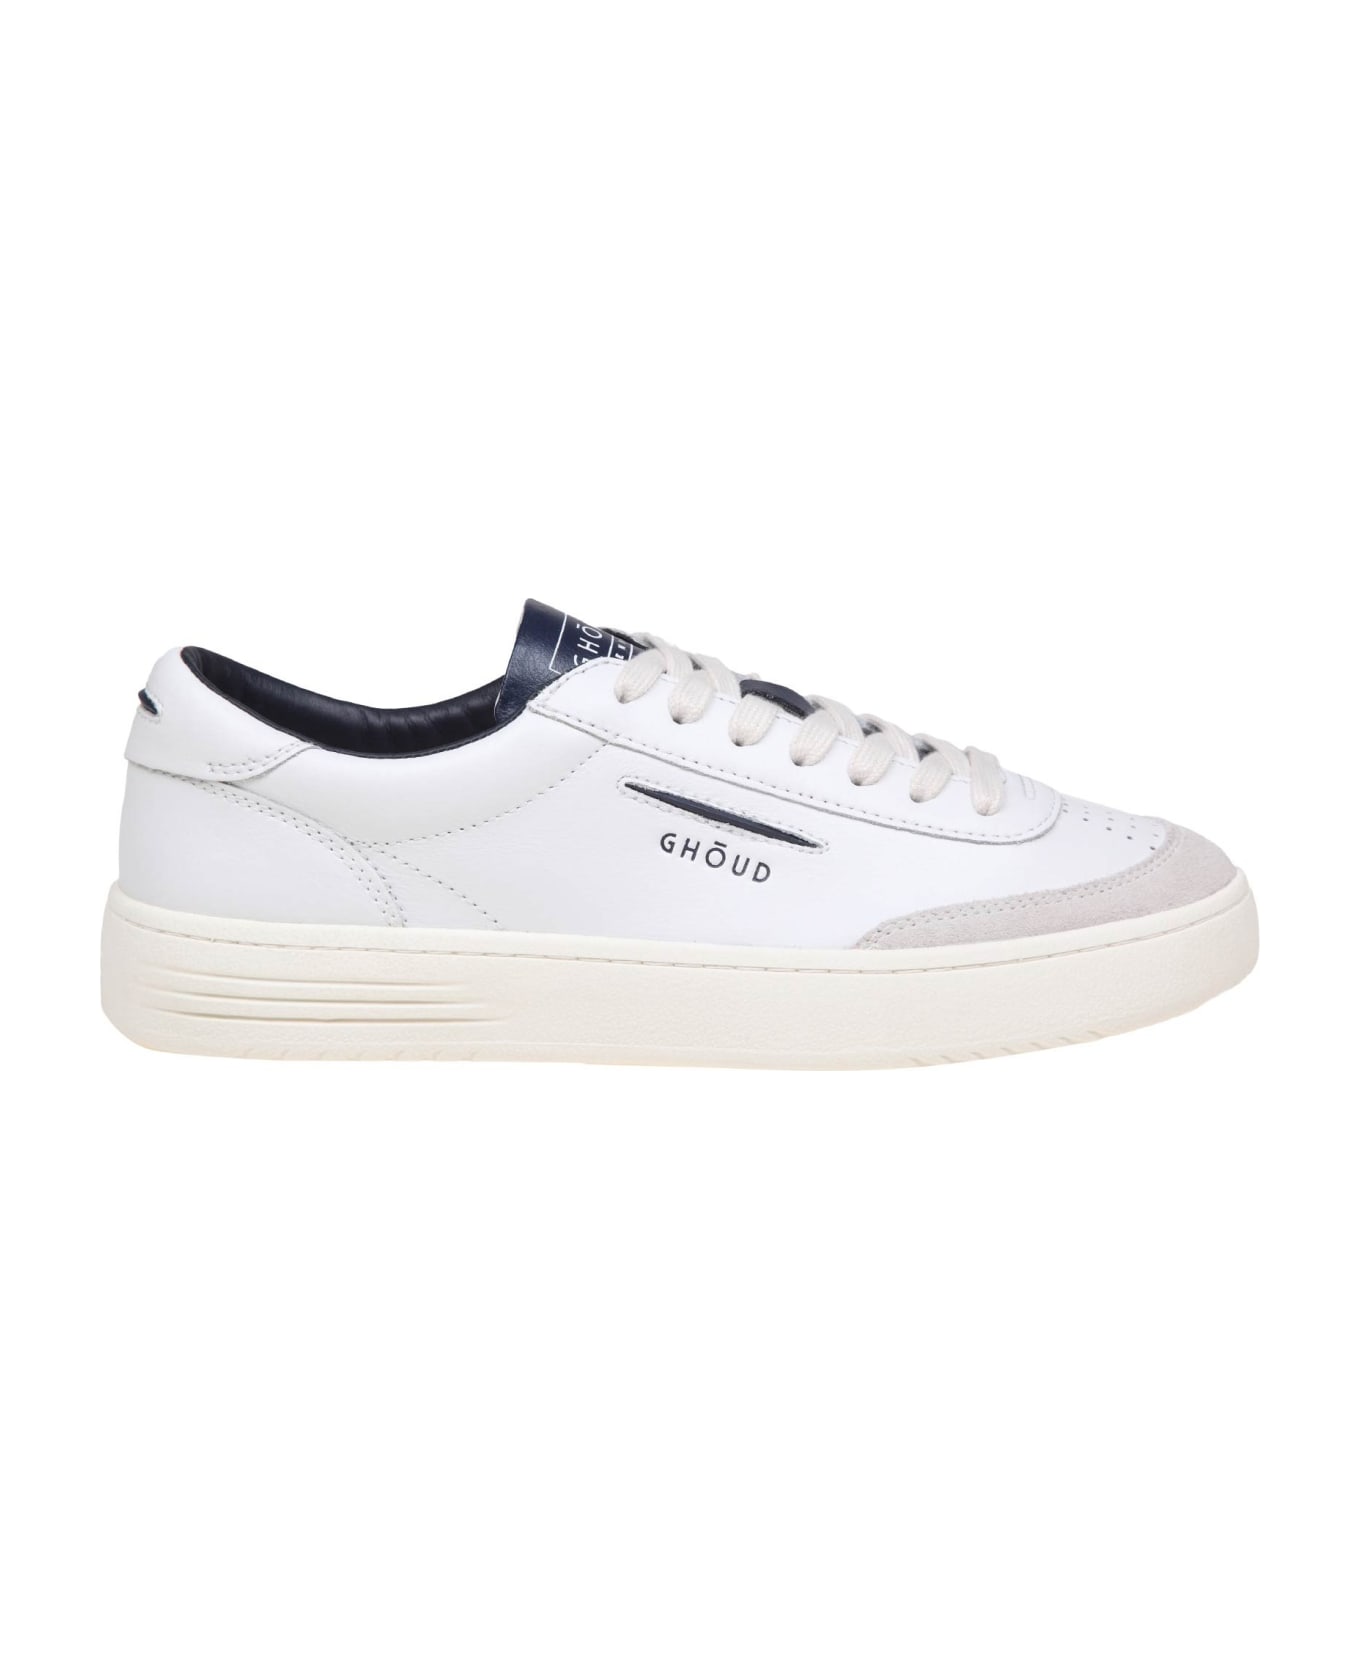 GHOUD Lido Low Sneakers In White/blue Leather And Suede - LEAT/SUEDE WHT/BLUE スニーカー